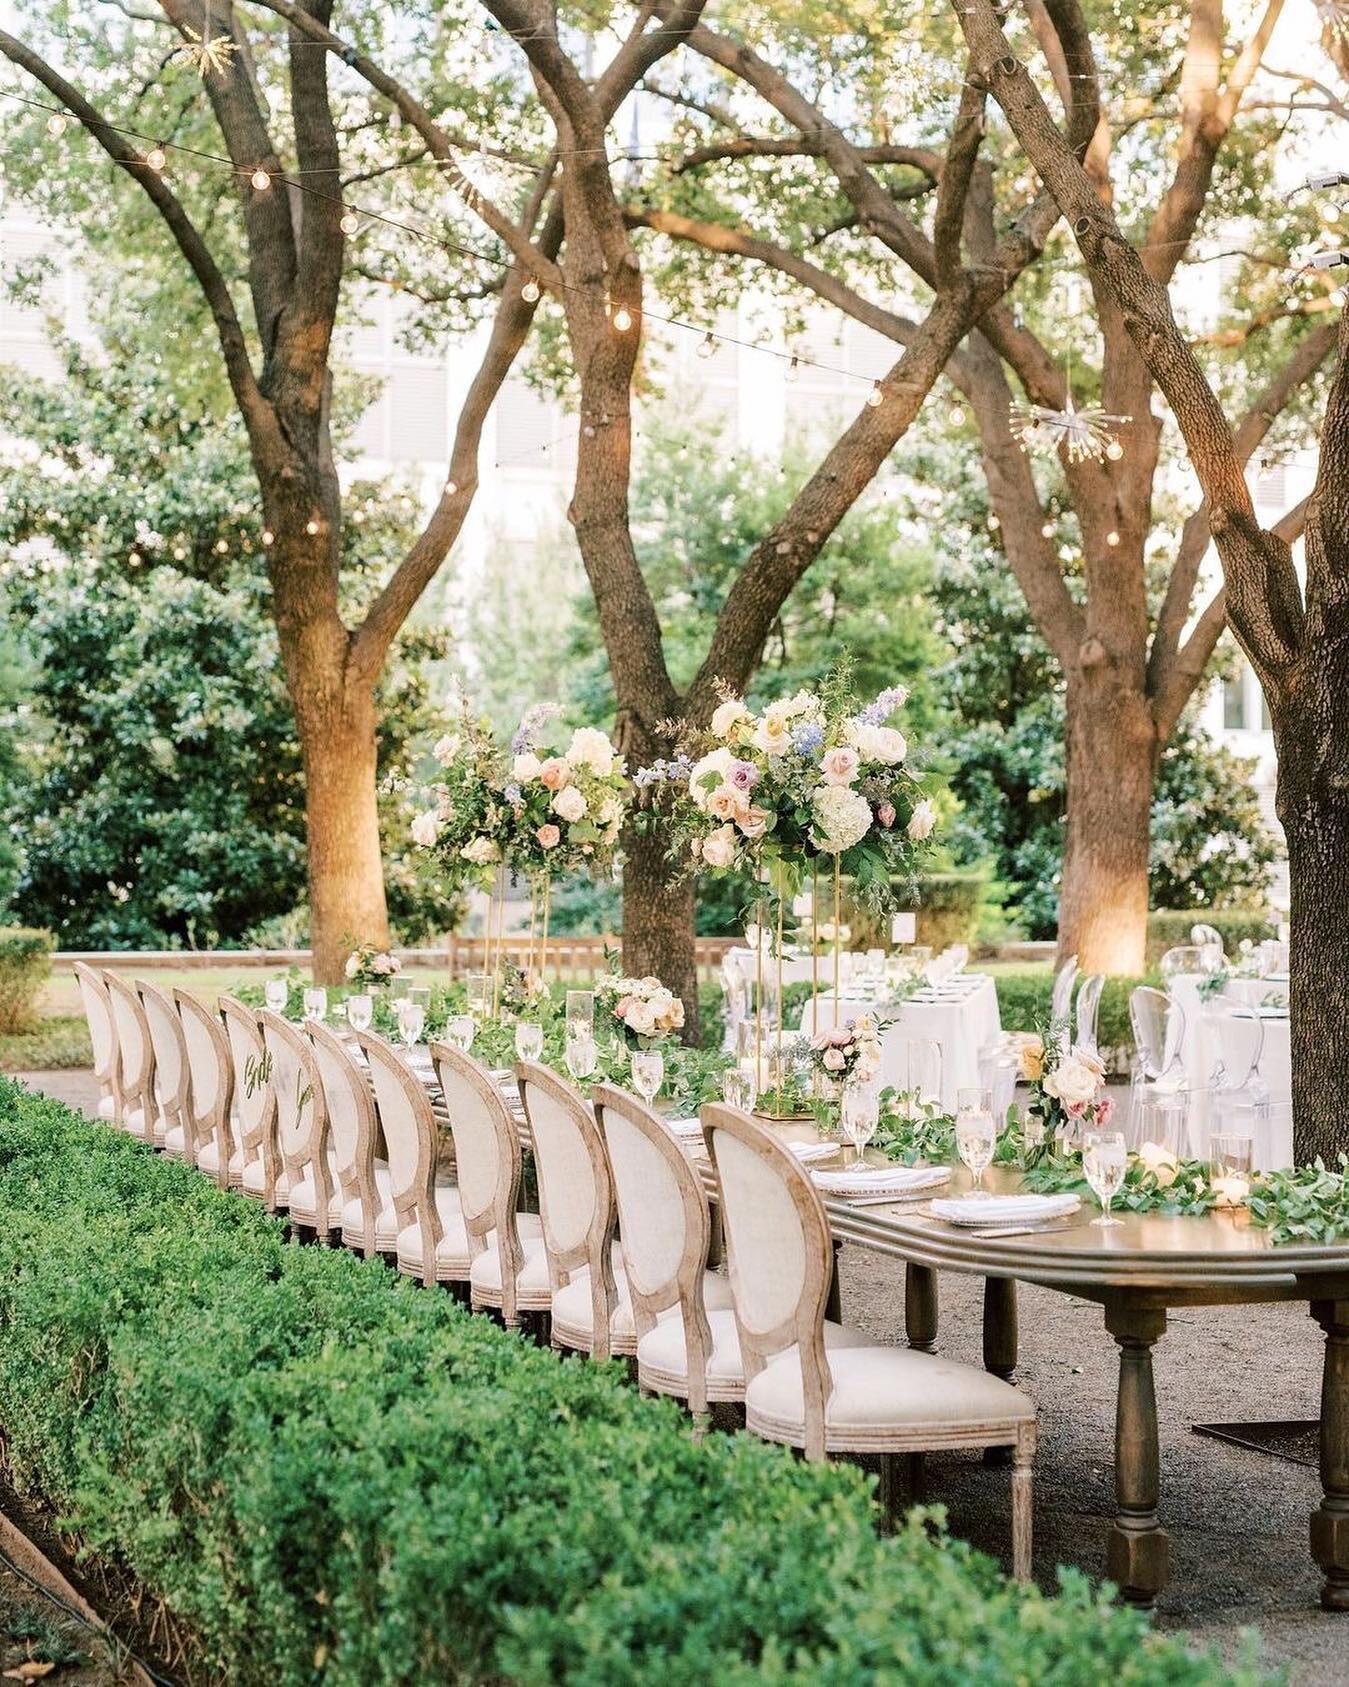 From garden fairy tales to an outdoor oasis, we love planning it all with our brides- and grooms-to-be. 

📸: @katemcleodstudio